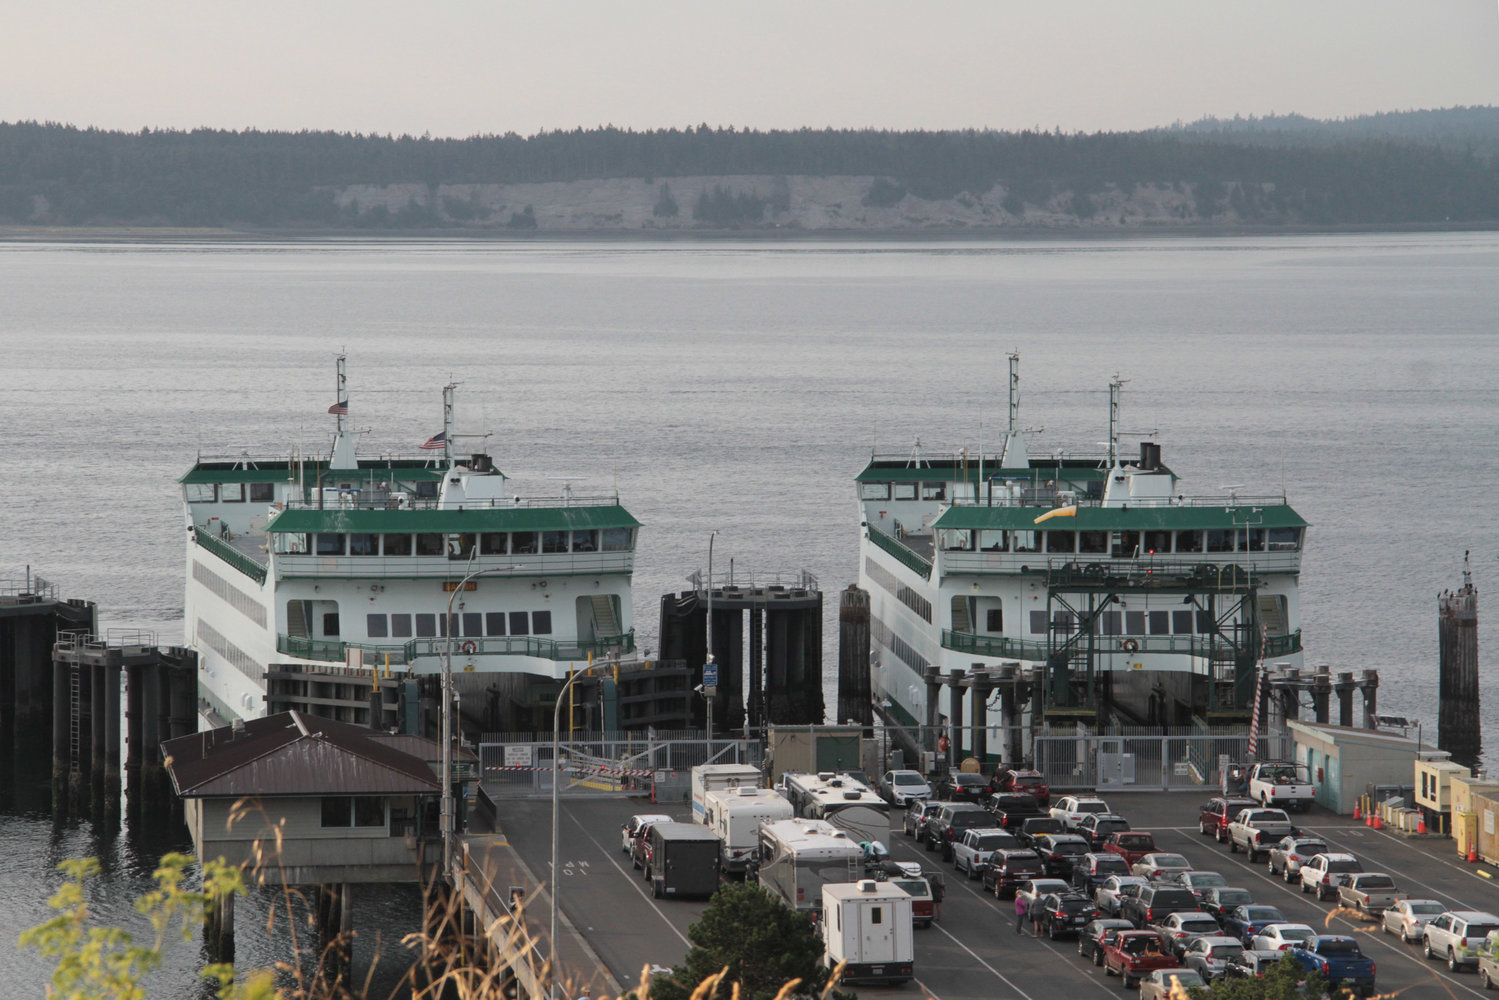 Vehicles line up at the Port Townsend-Coupeville Ferry Terminal. Tourism from the Port Townsend-Coupeville ferry is estimated to be the source of 14 percent of all jobs in Jefferson County, according to an economic study funded in part by the Port of Port Townsend.